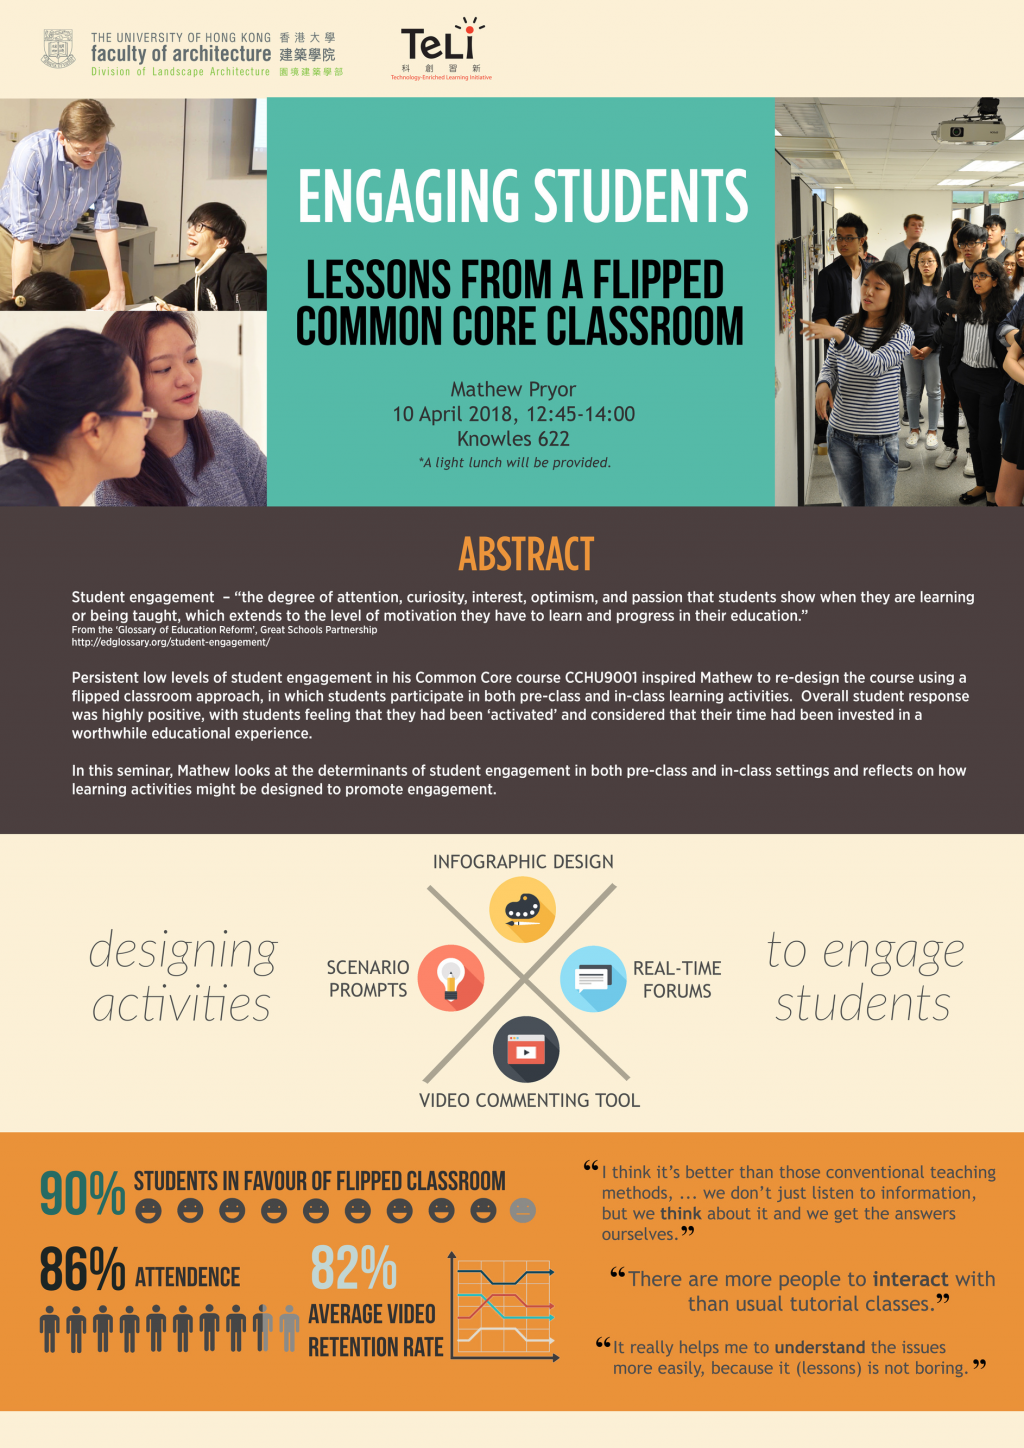 Engaging students: lessons from a flipped Common Core classroom by Mr. Mathew Pryor